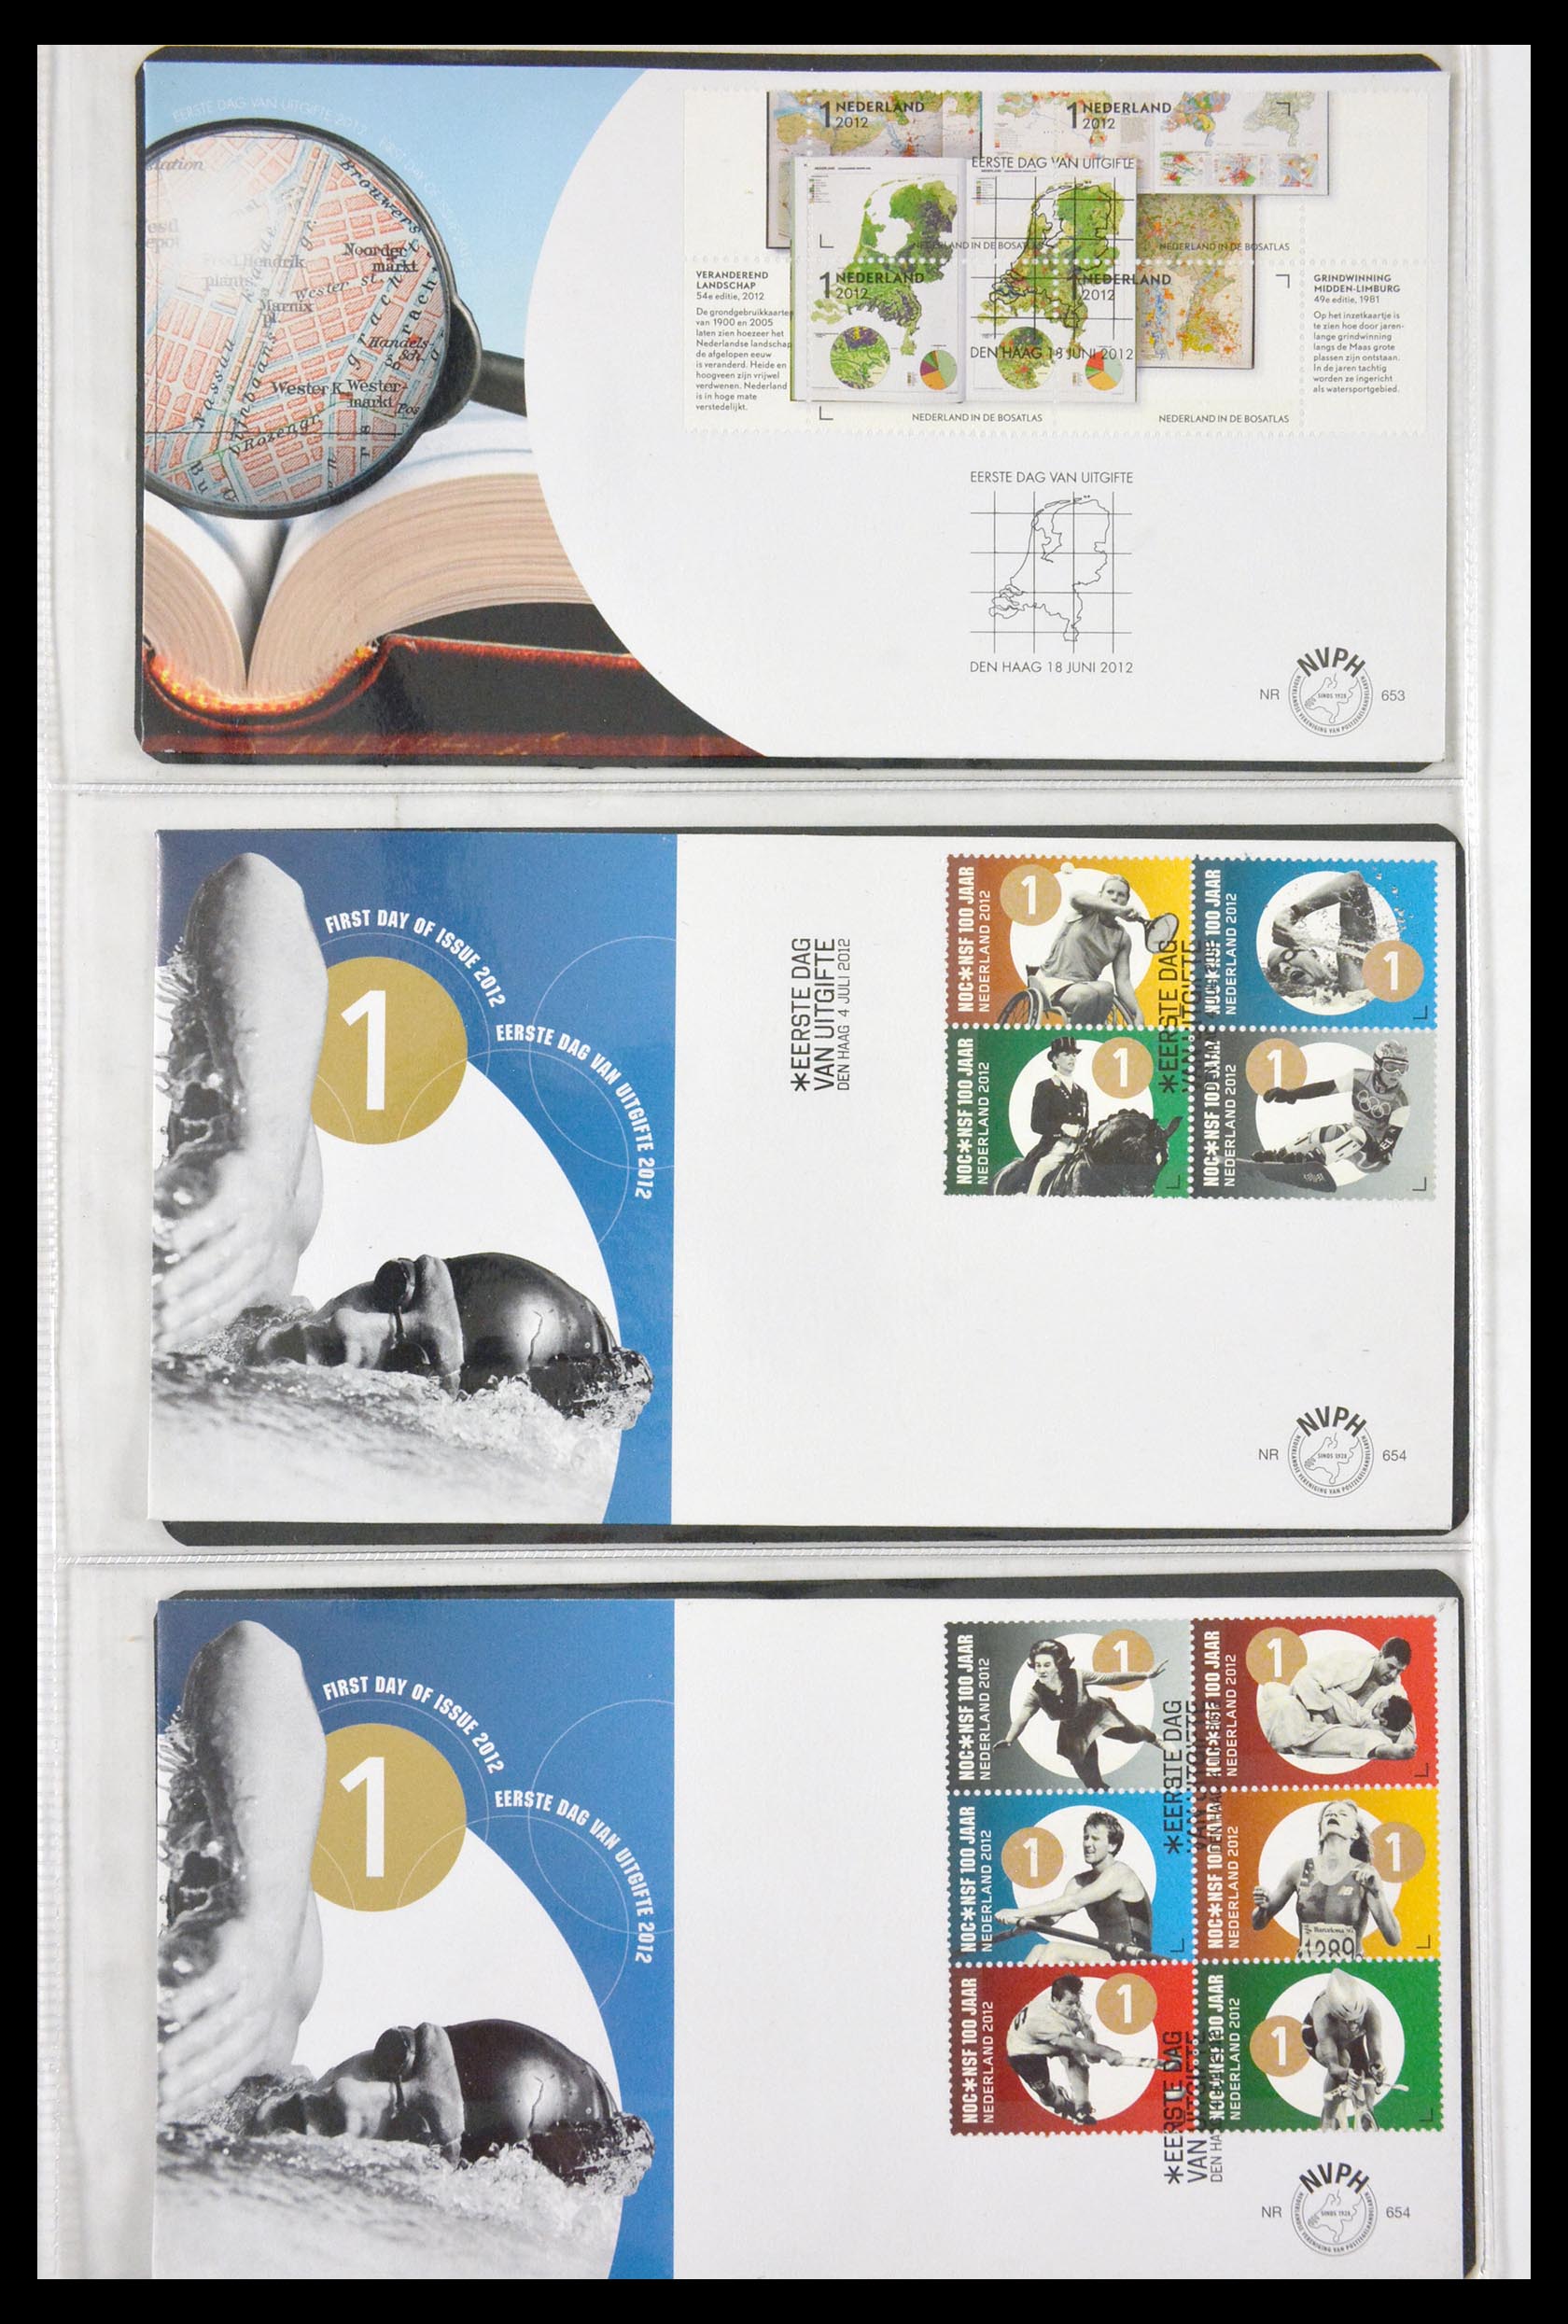 29850 091 - 29850 Netherlands FDC's 2001-2012.